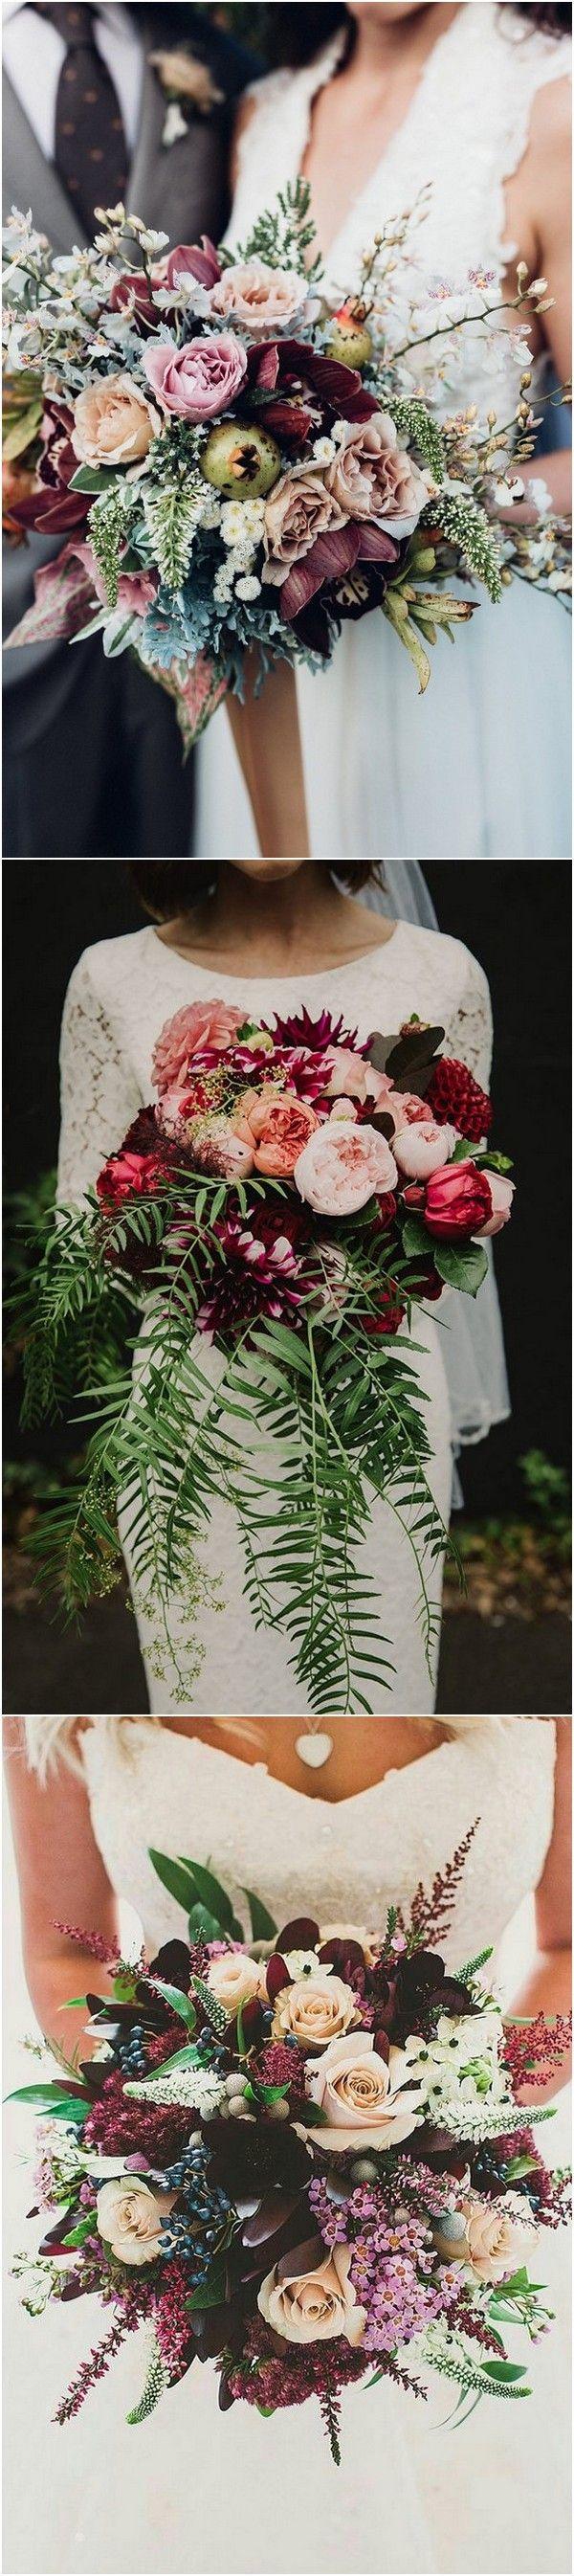 Свадьба - Trending-15 Gorgeous Burgundy And Blush Wedding Bouquet Ideas - Page 2 Of 3